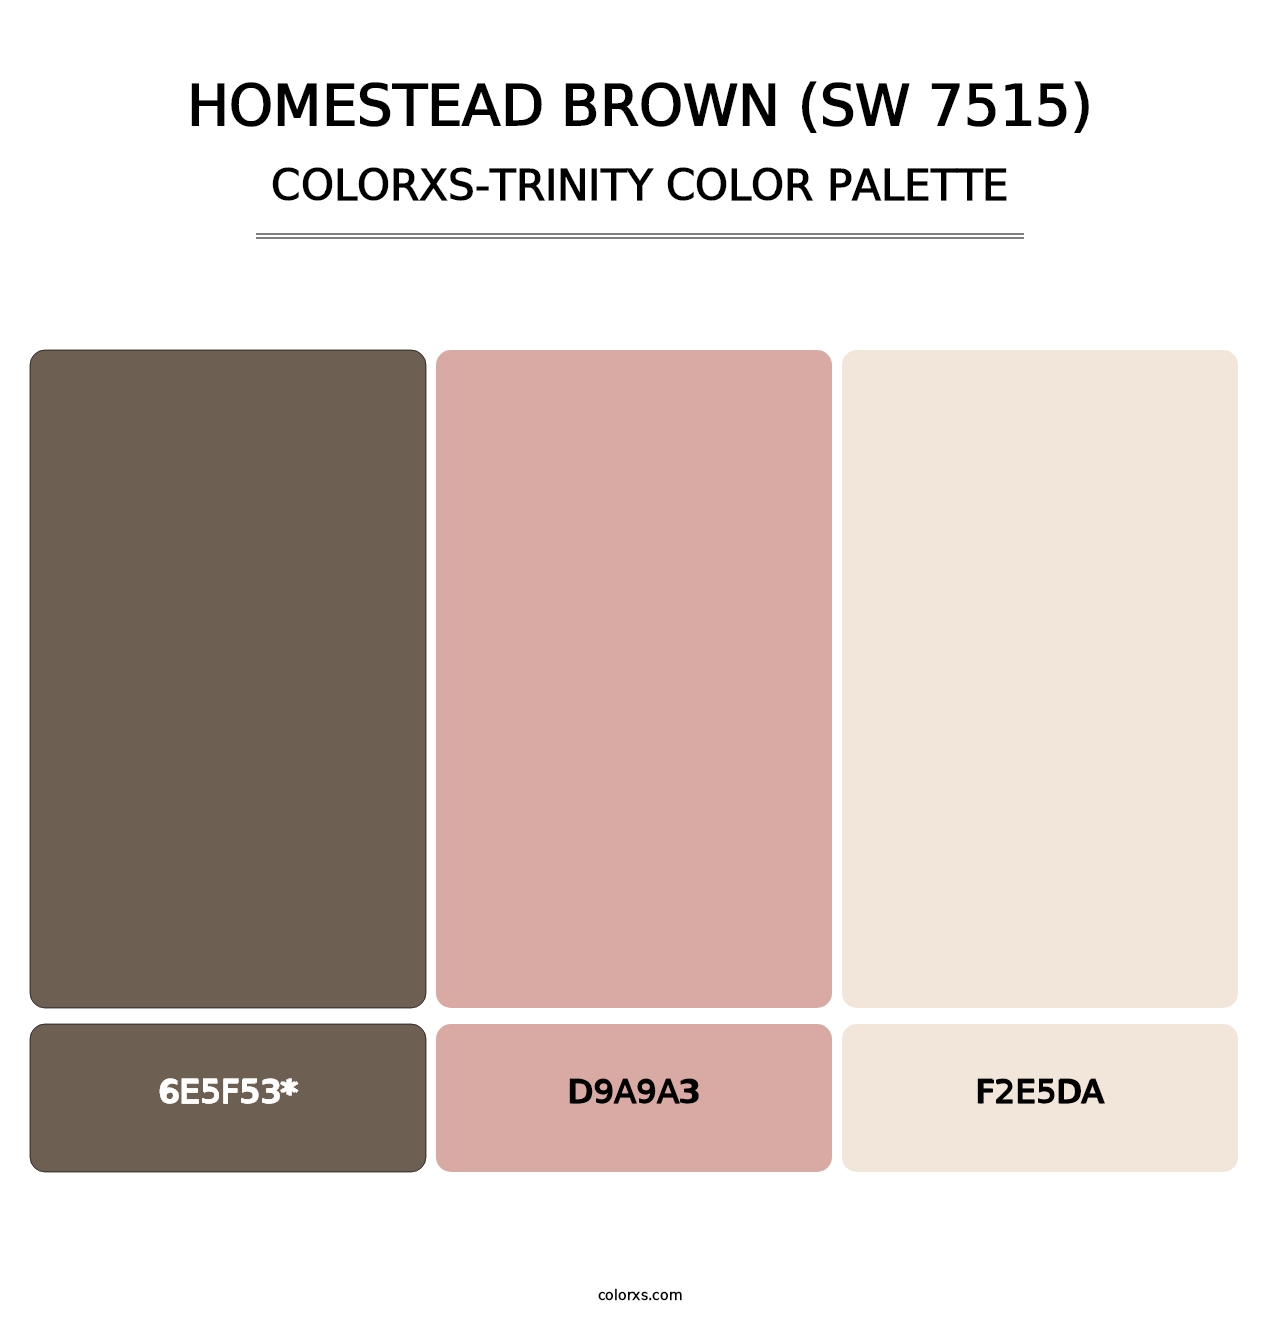 Homestead Brown (SW 7515) - Colorxs Trinity Palette